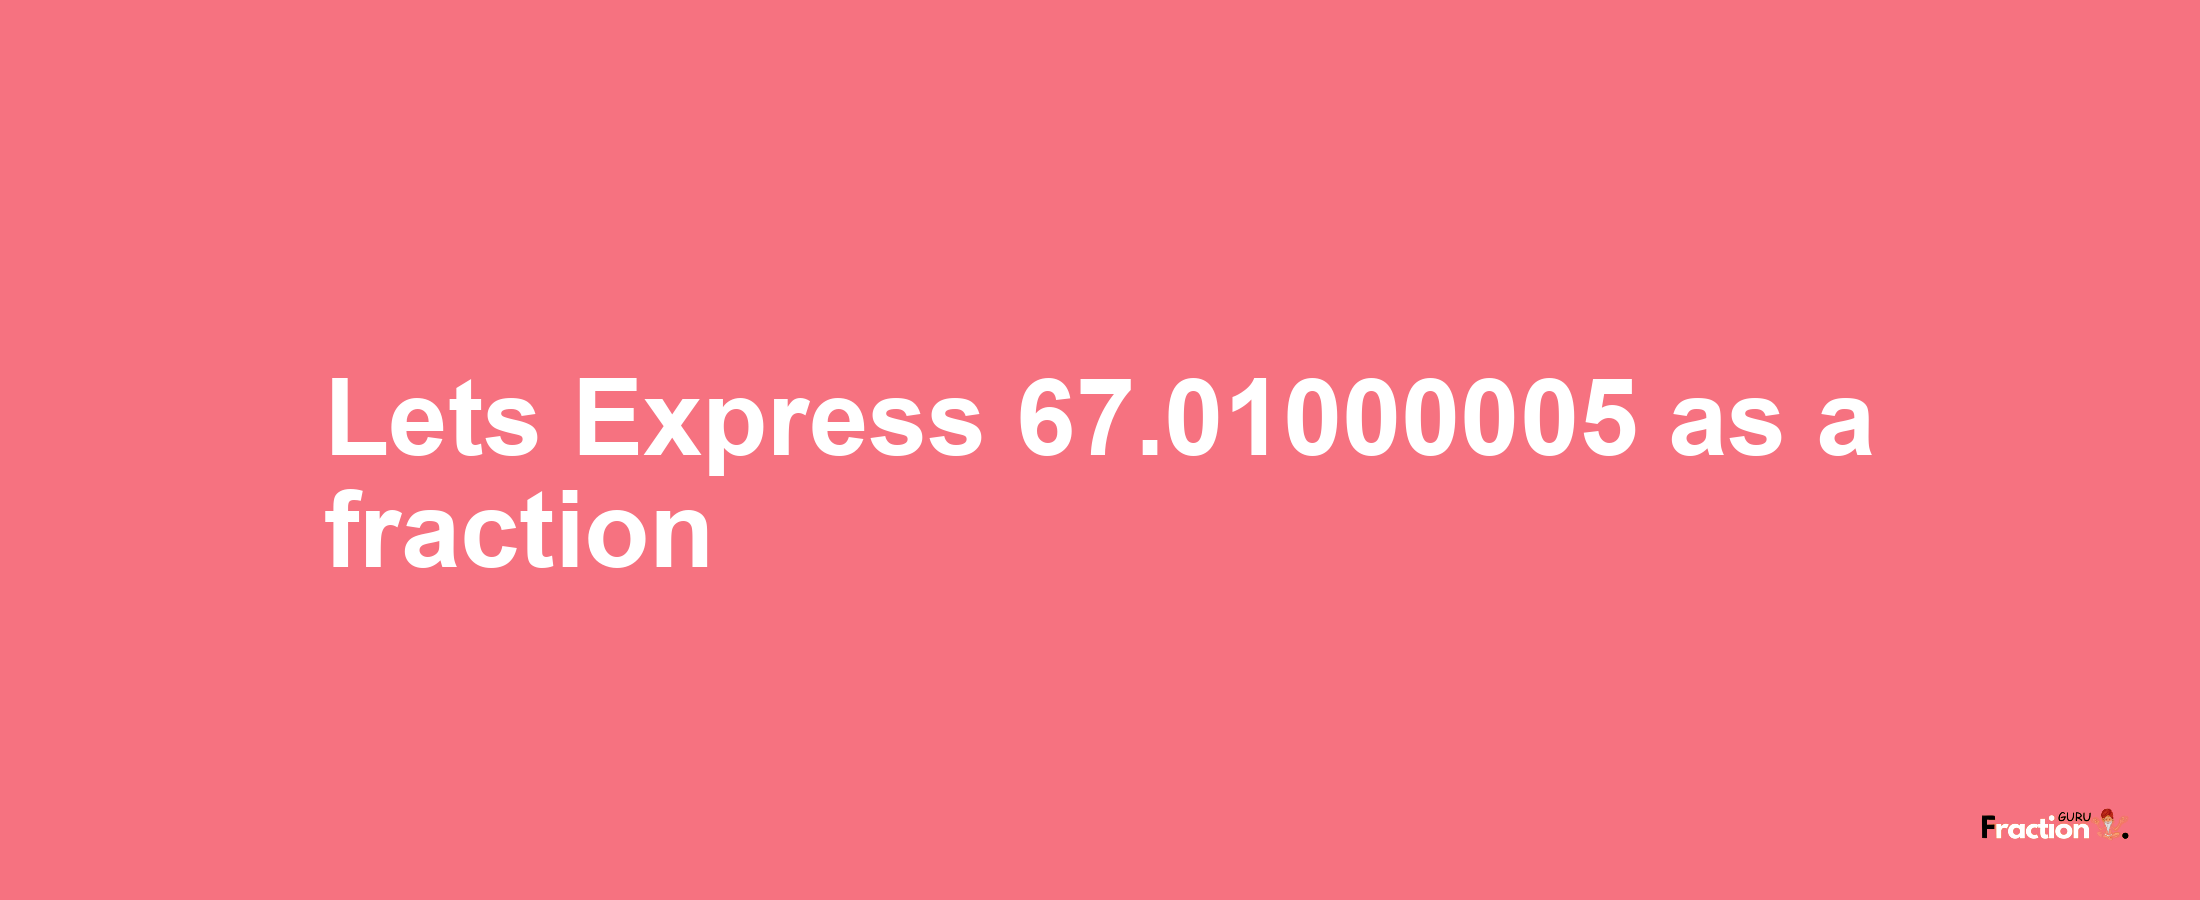 Lets Express 67.01000005 as afraction